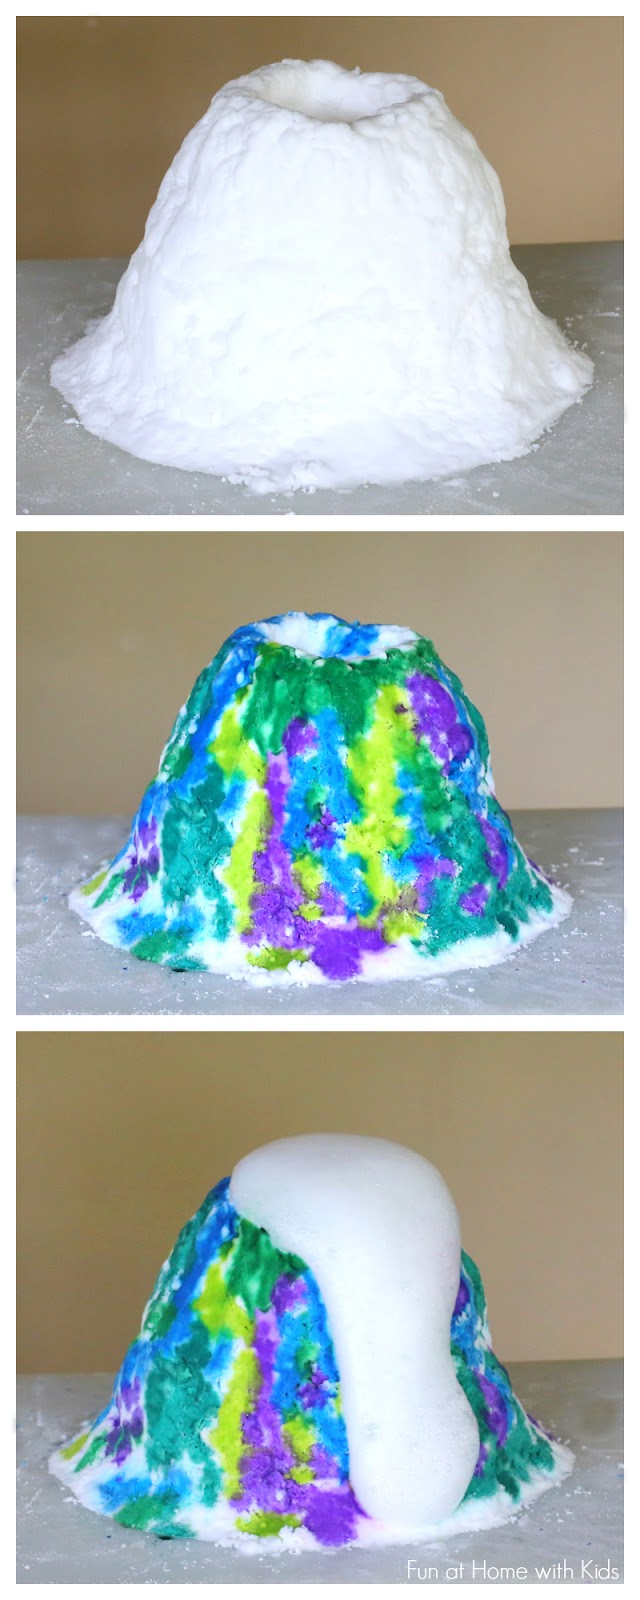 Build!  Paint!  Erupt!  Art and science combine in this spectacular giant foaming volcano.  From Fun at Home with Kids